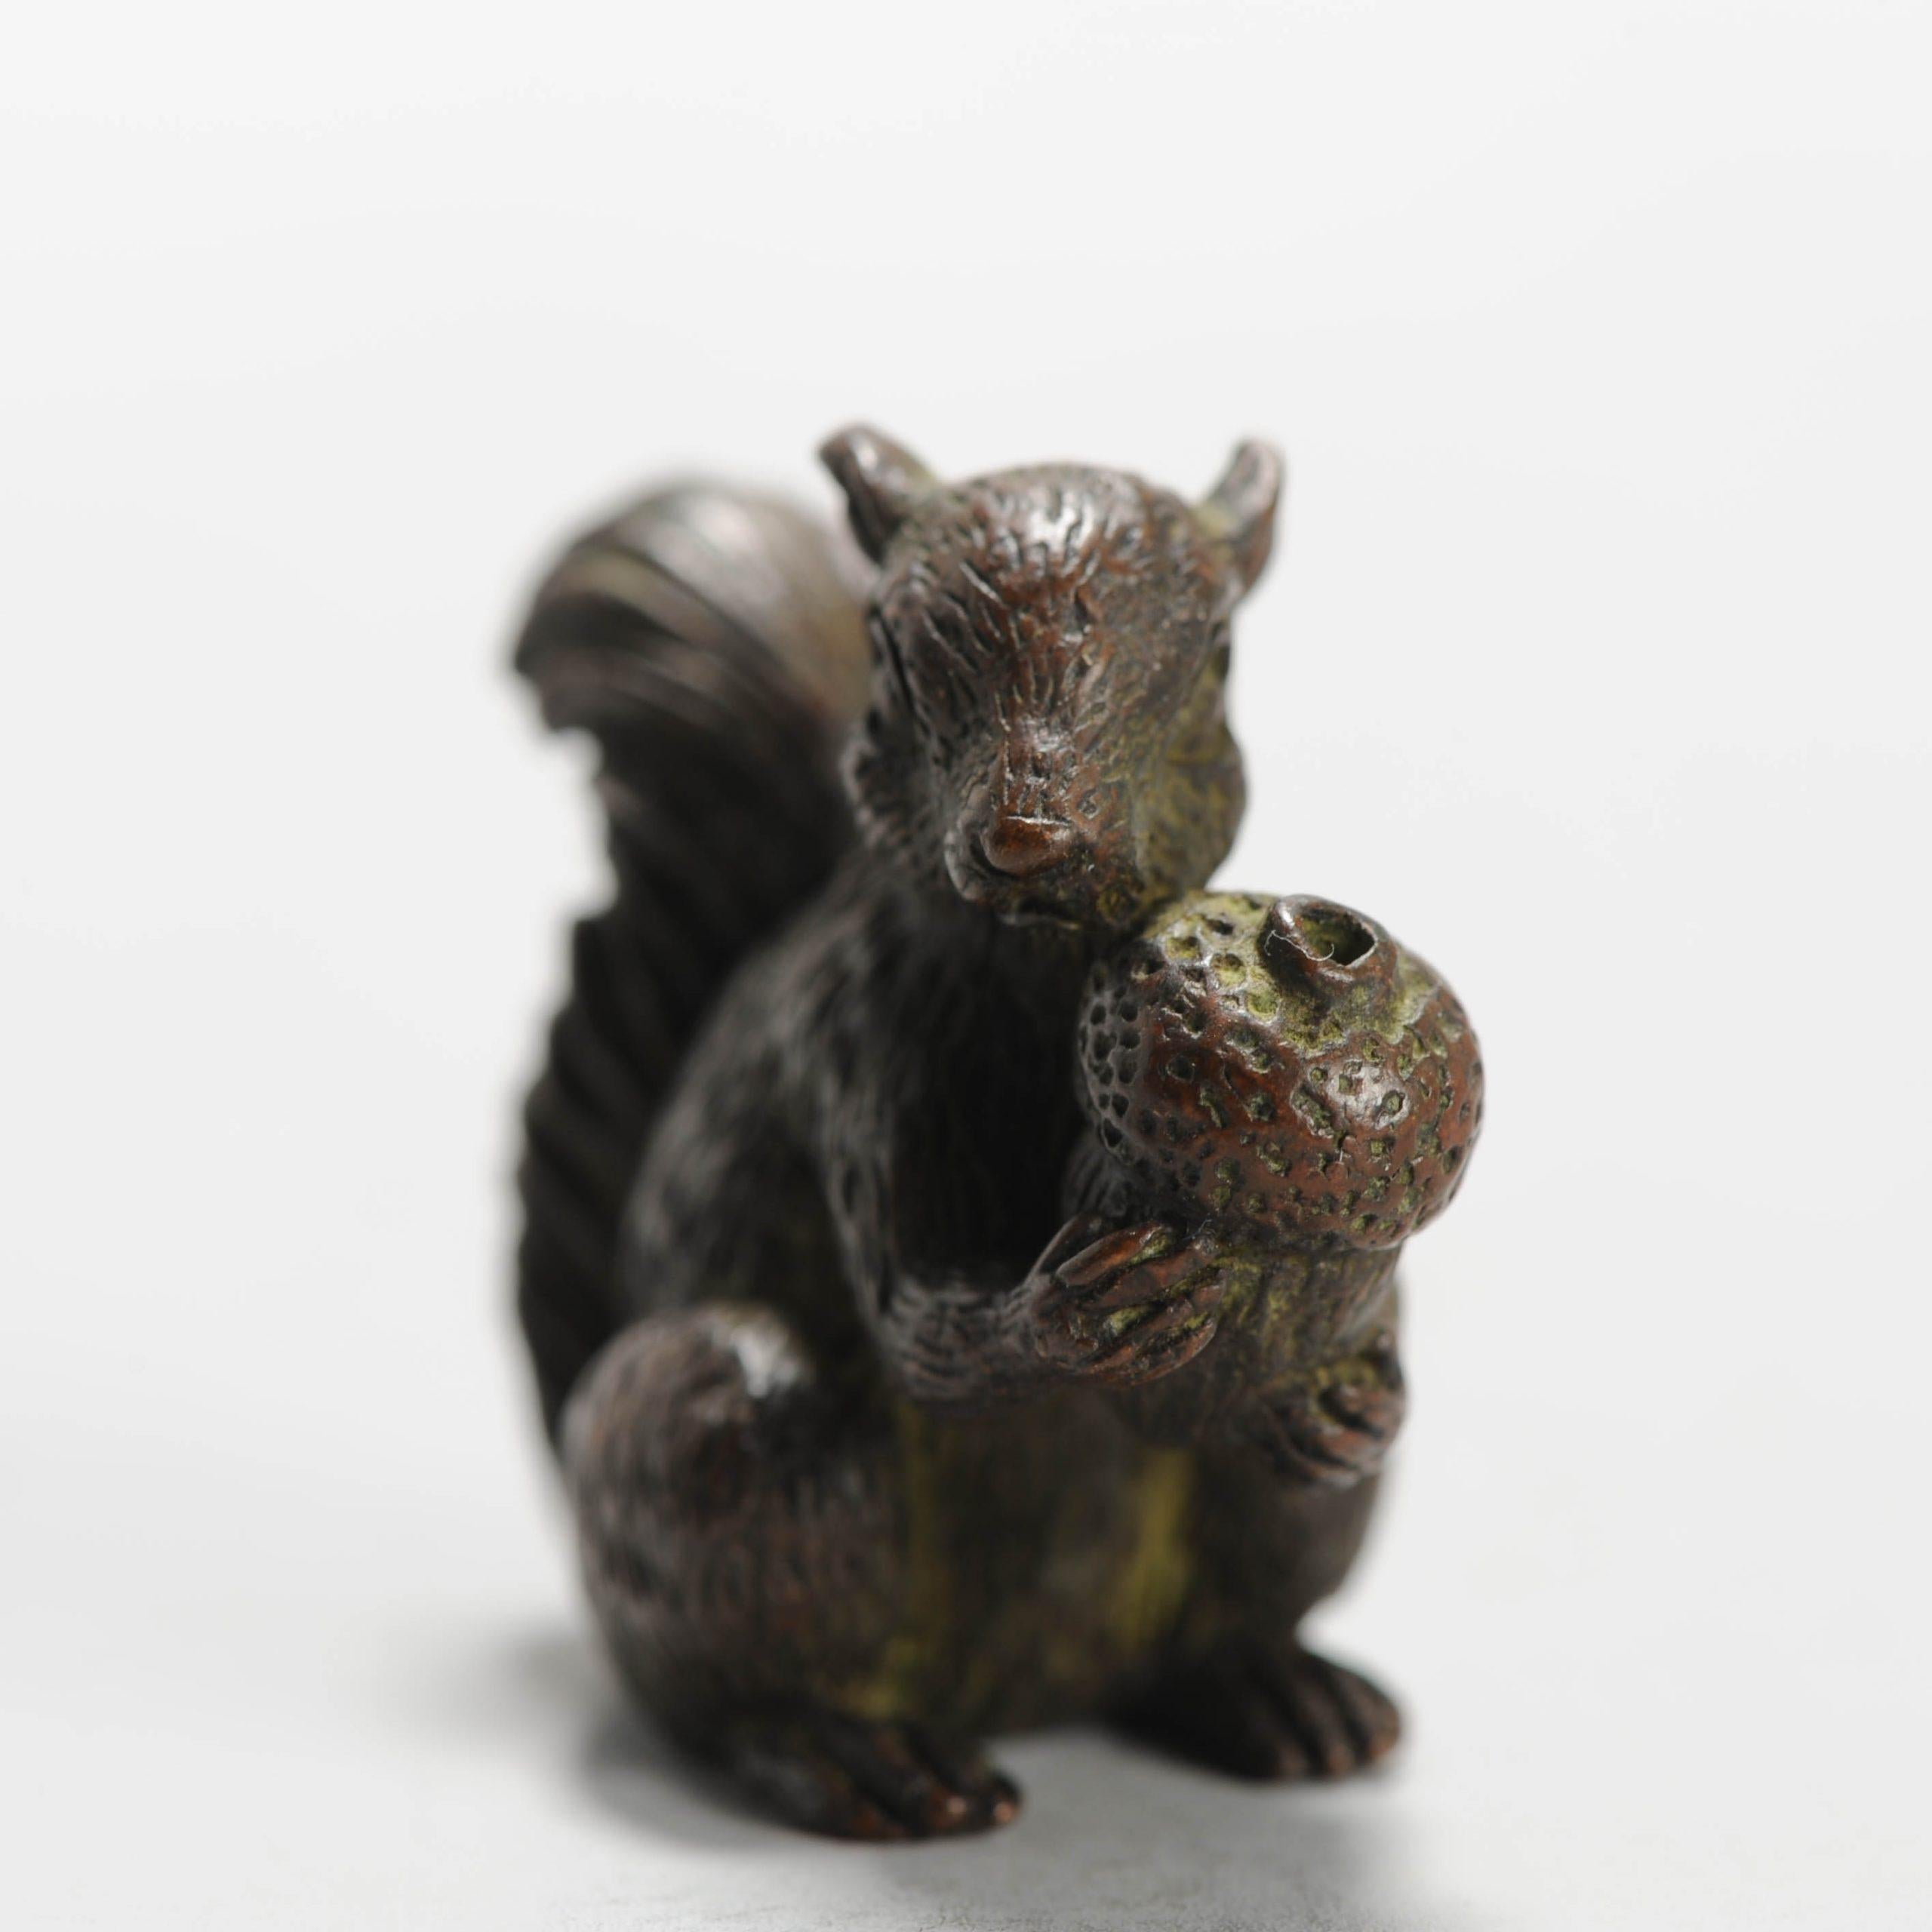 19th / 20th c Bronze Netsuke Squirrel with a nut Japanese Japan Signed
Condition
Period
20th century Meiji Periode (1867-1912)